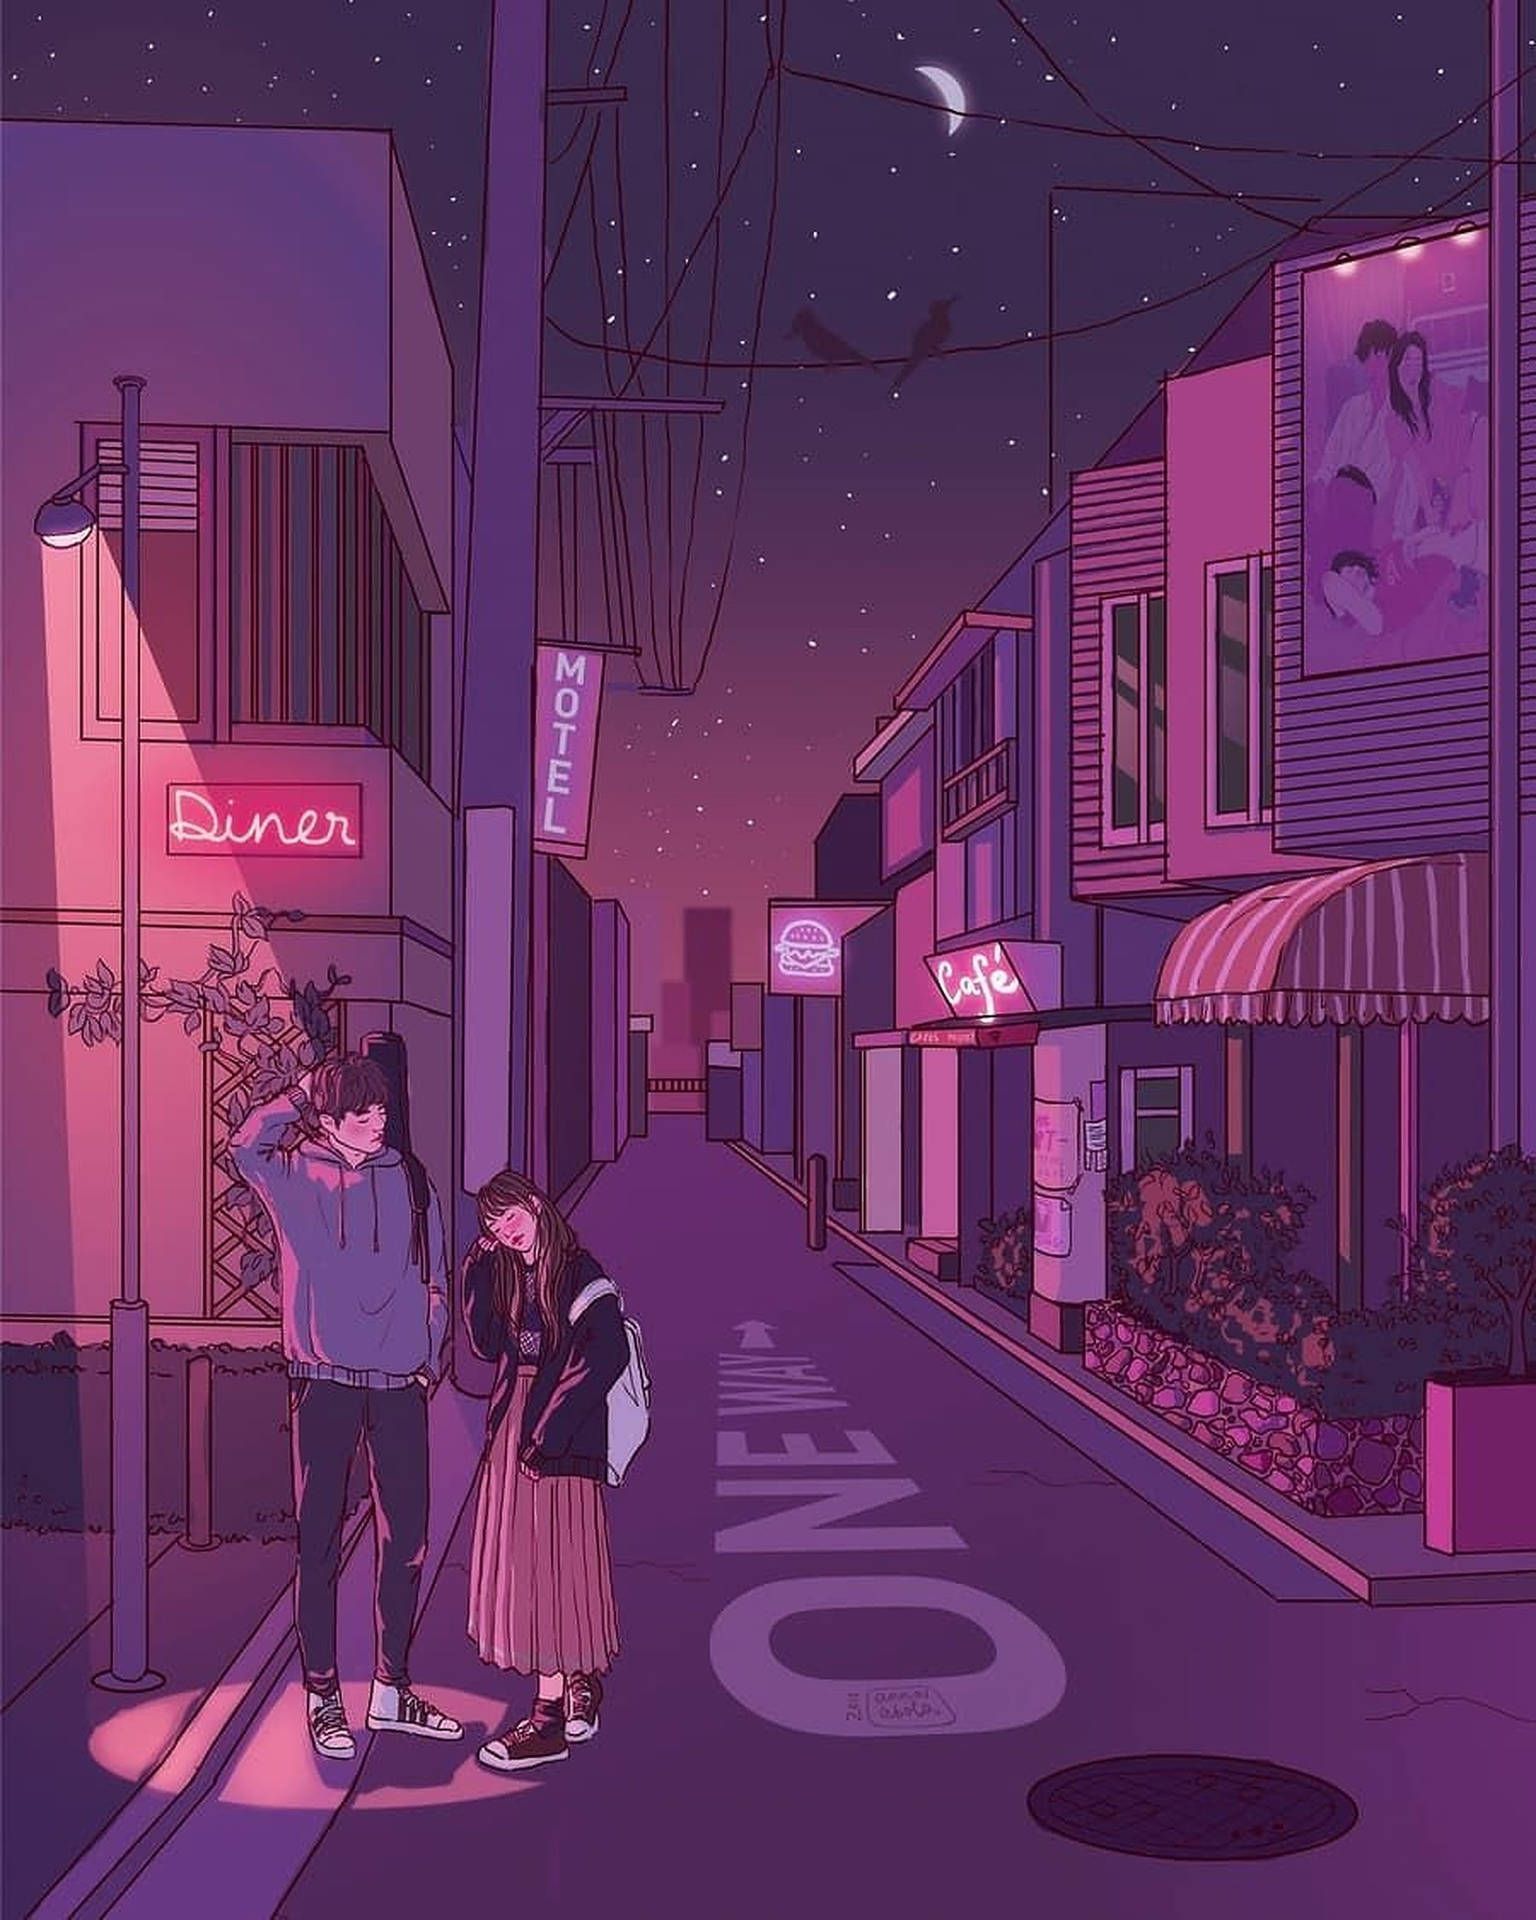 A couple standing on the sidewalk in front of buildings - Anime